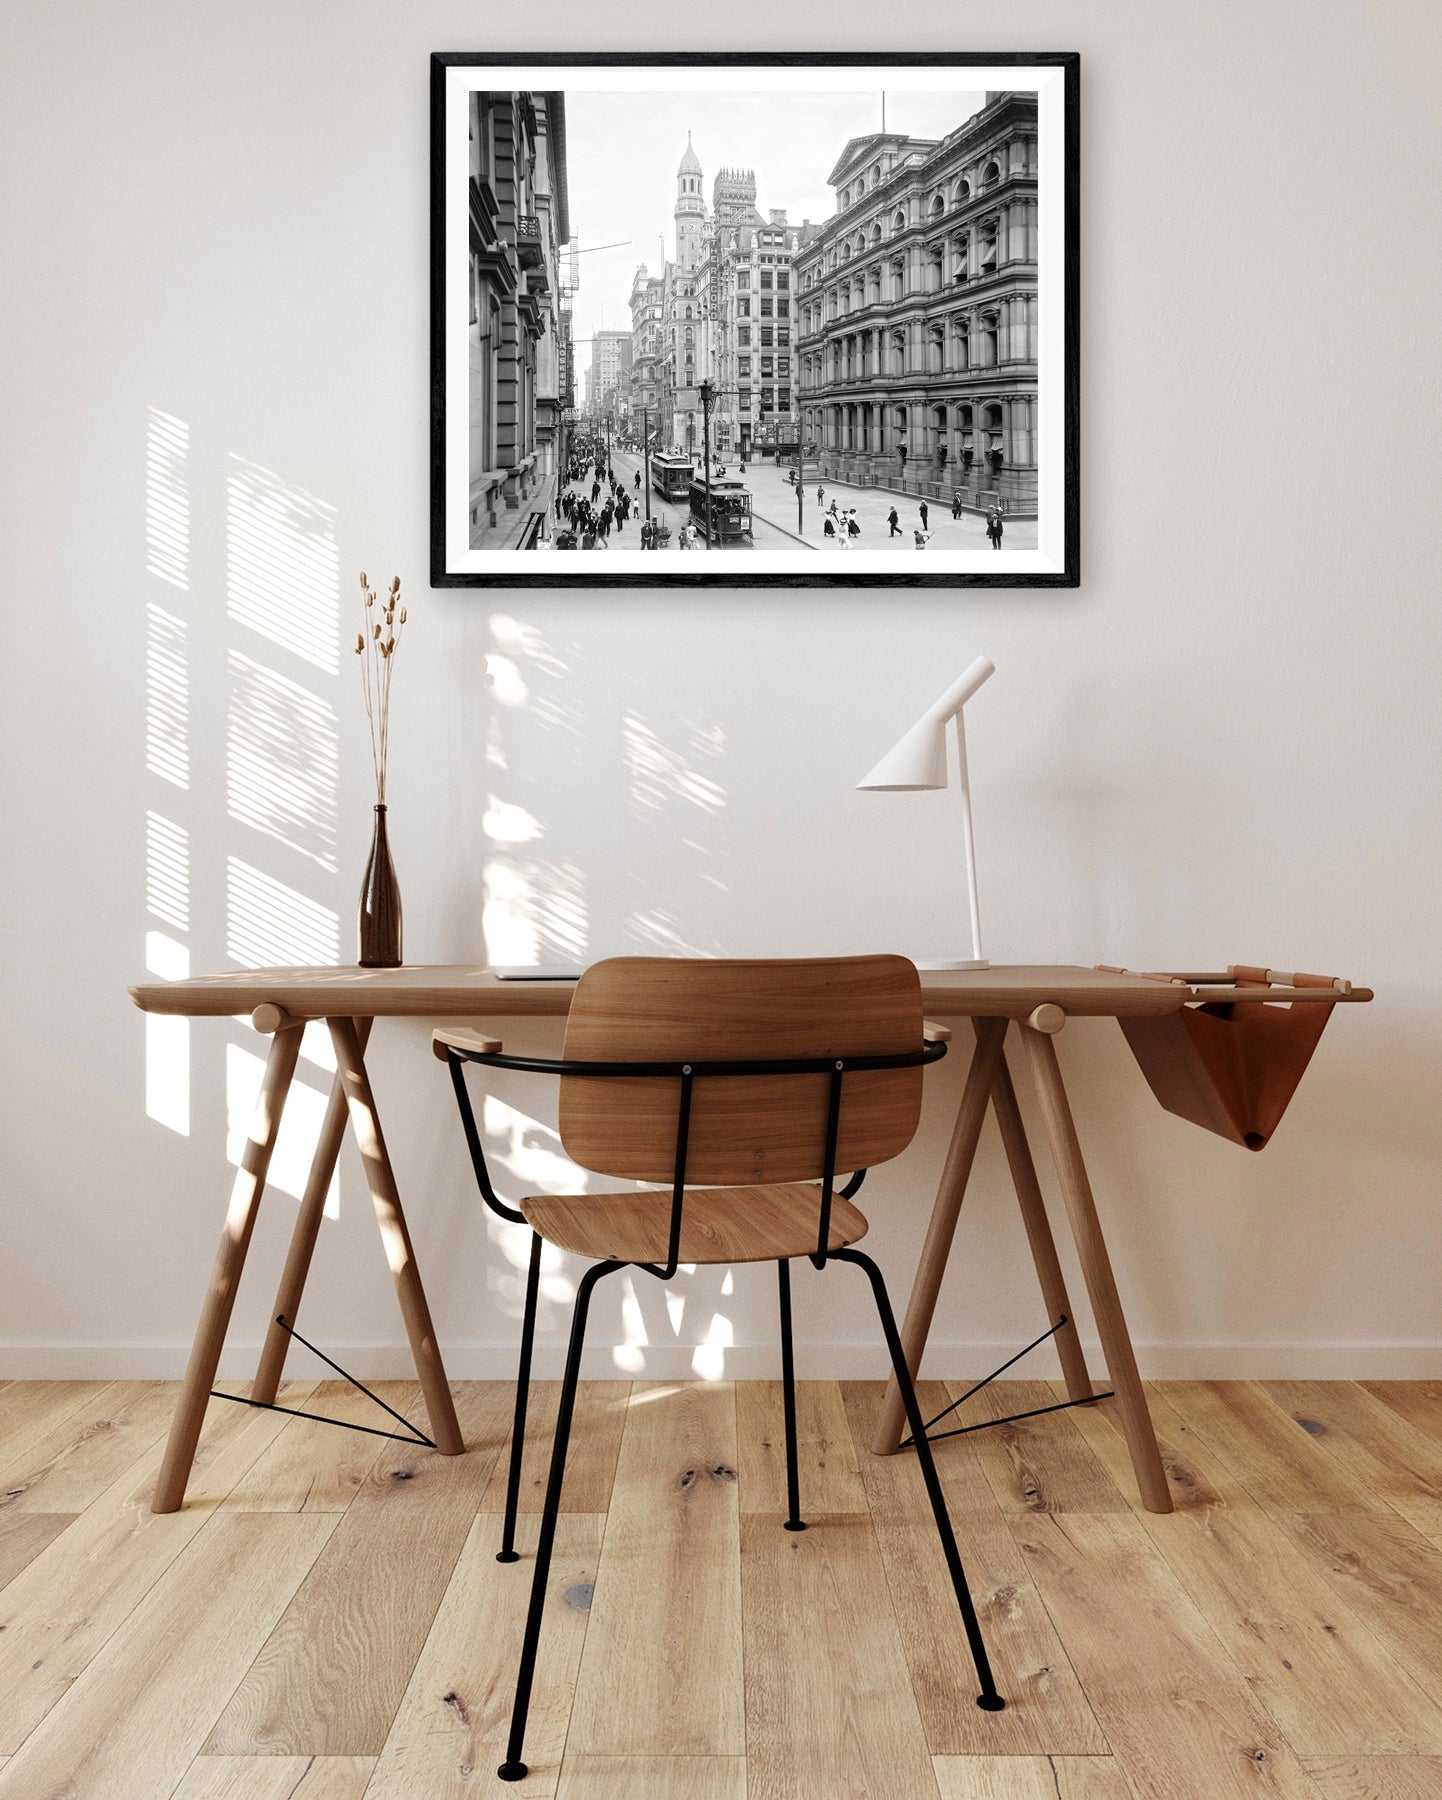 A framed paper print hanging above a brown desk and chair